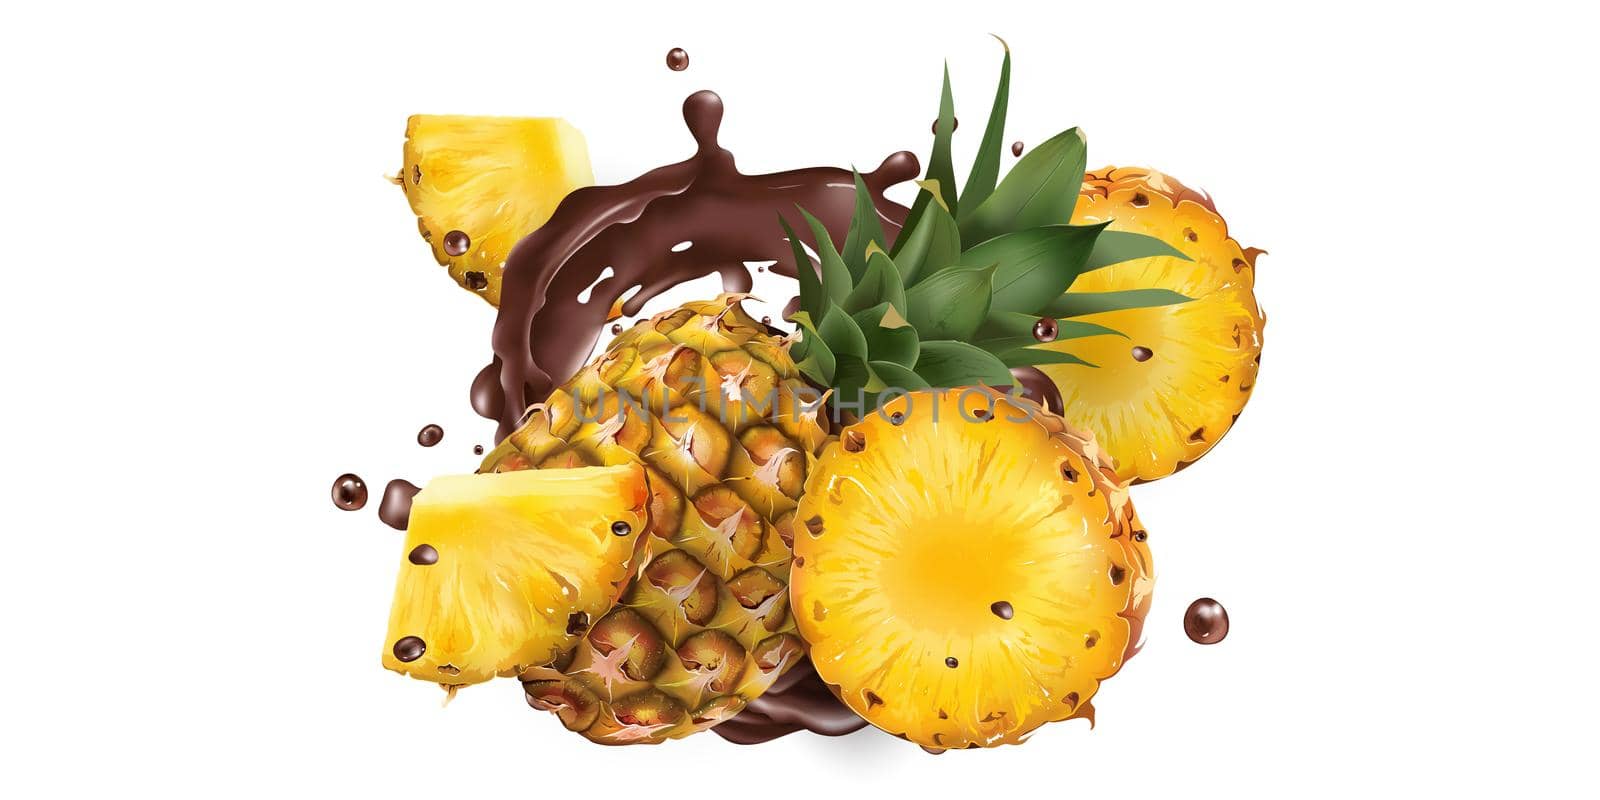 Whole and sliced pineapples in chocolate splashes on a white background. Realistic style illustration.